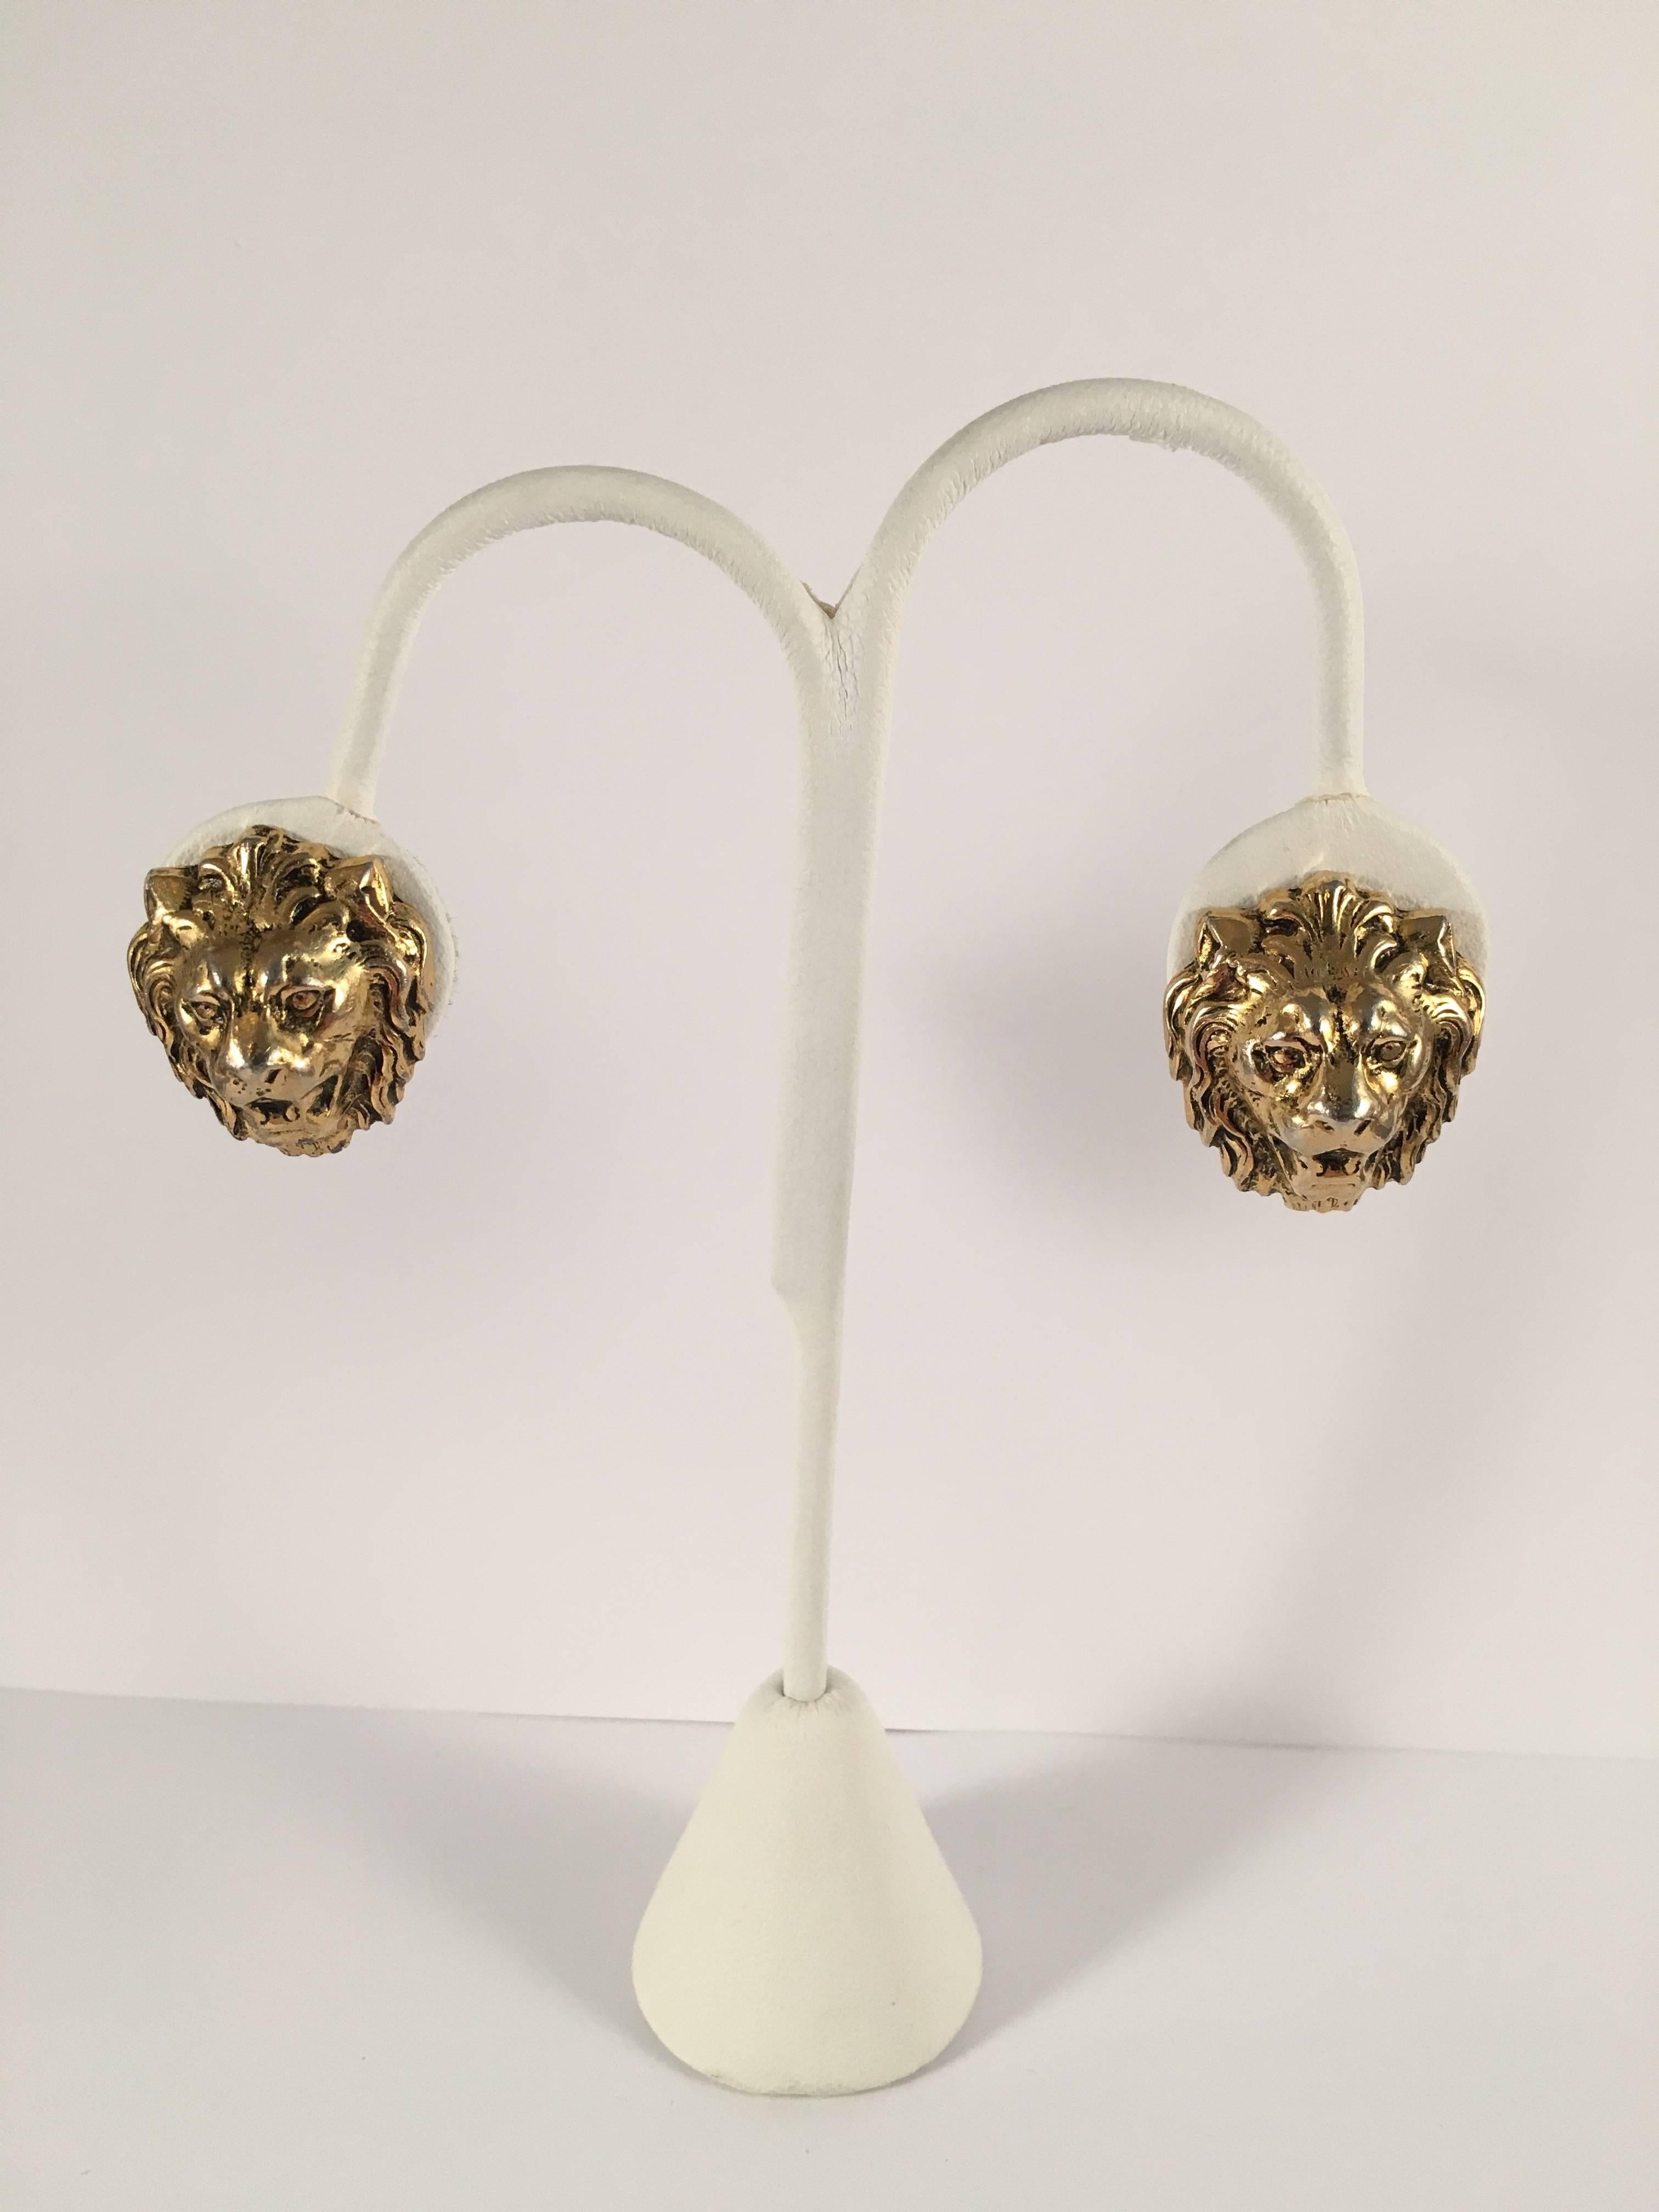 1960s goldtone clip-on lion head earrings from Accessocraft. These earrings are in excellent condition. They are clip-on earrings but they have screw-backs so that the level of tightness can be adjusted. They are marked 'Accessocraft NYC' on the